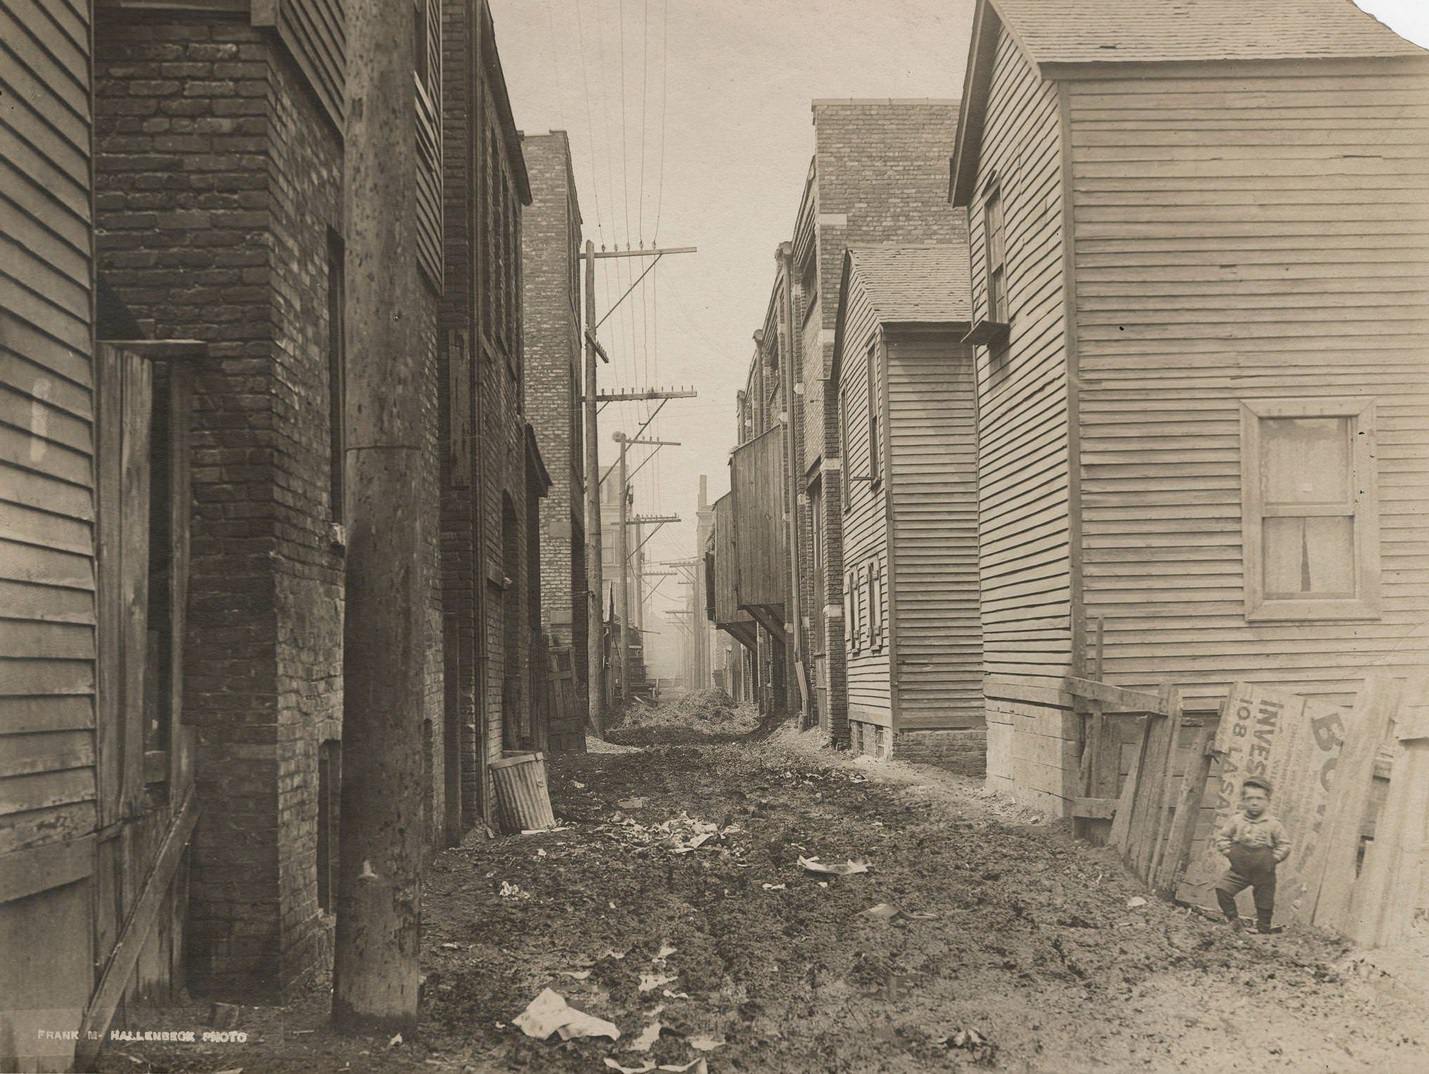 Alley north of Taylor Street, west from Jefferson Street, Chicago, Illinois, April 28, 1910s